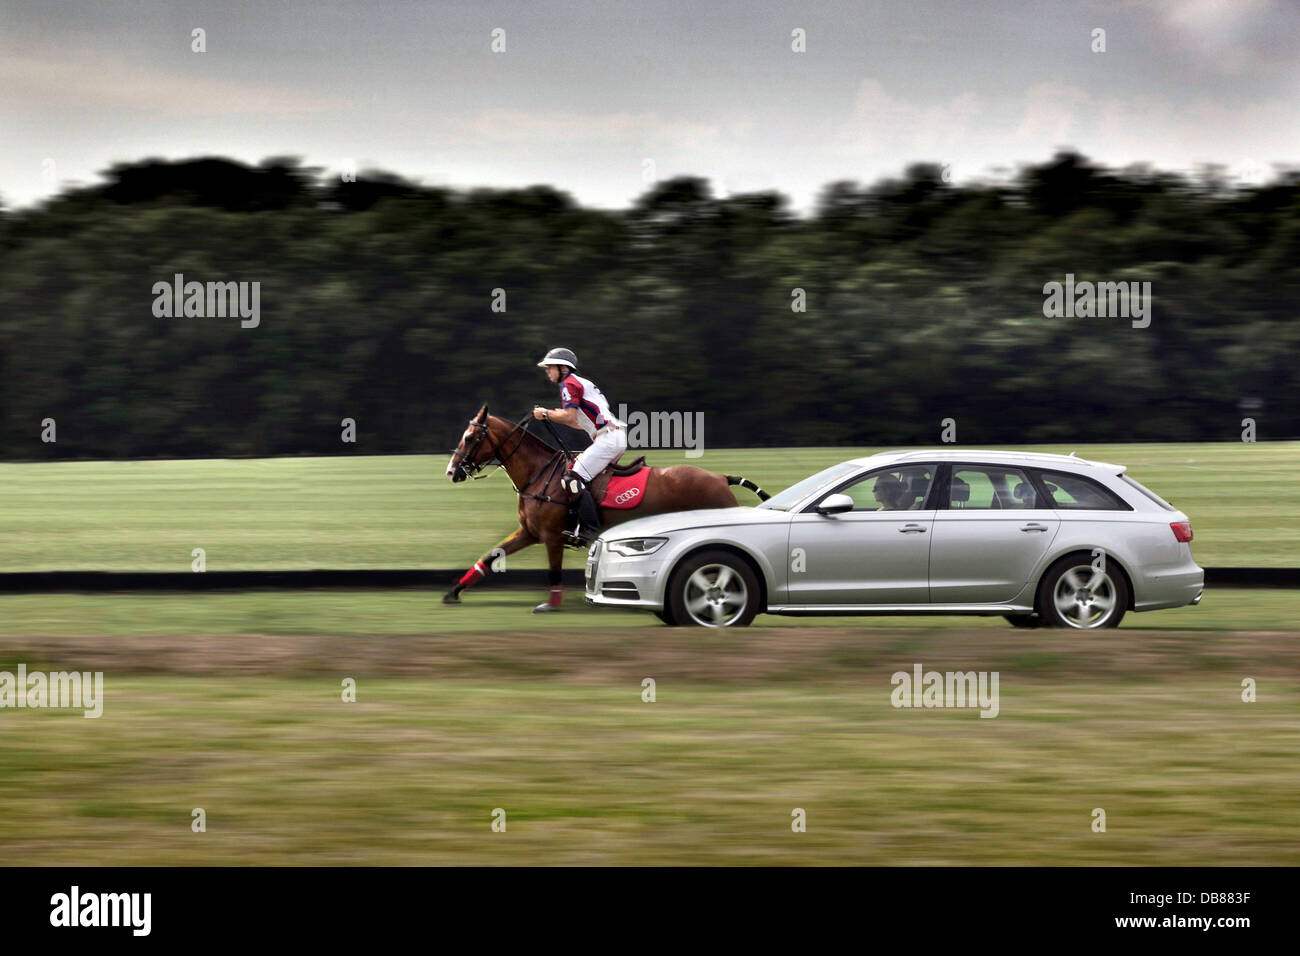 Polo Player Malcolm Borwick at the Guards Smith's Lawn Windsor Great Park riding at 38mph with Audi A6 the speed limit of the park, the maximum a horse can travel. Stock Photo